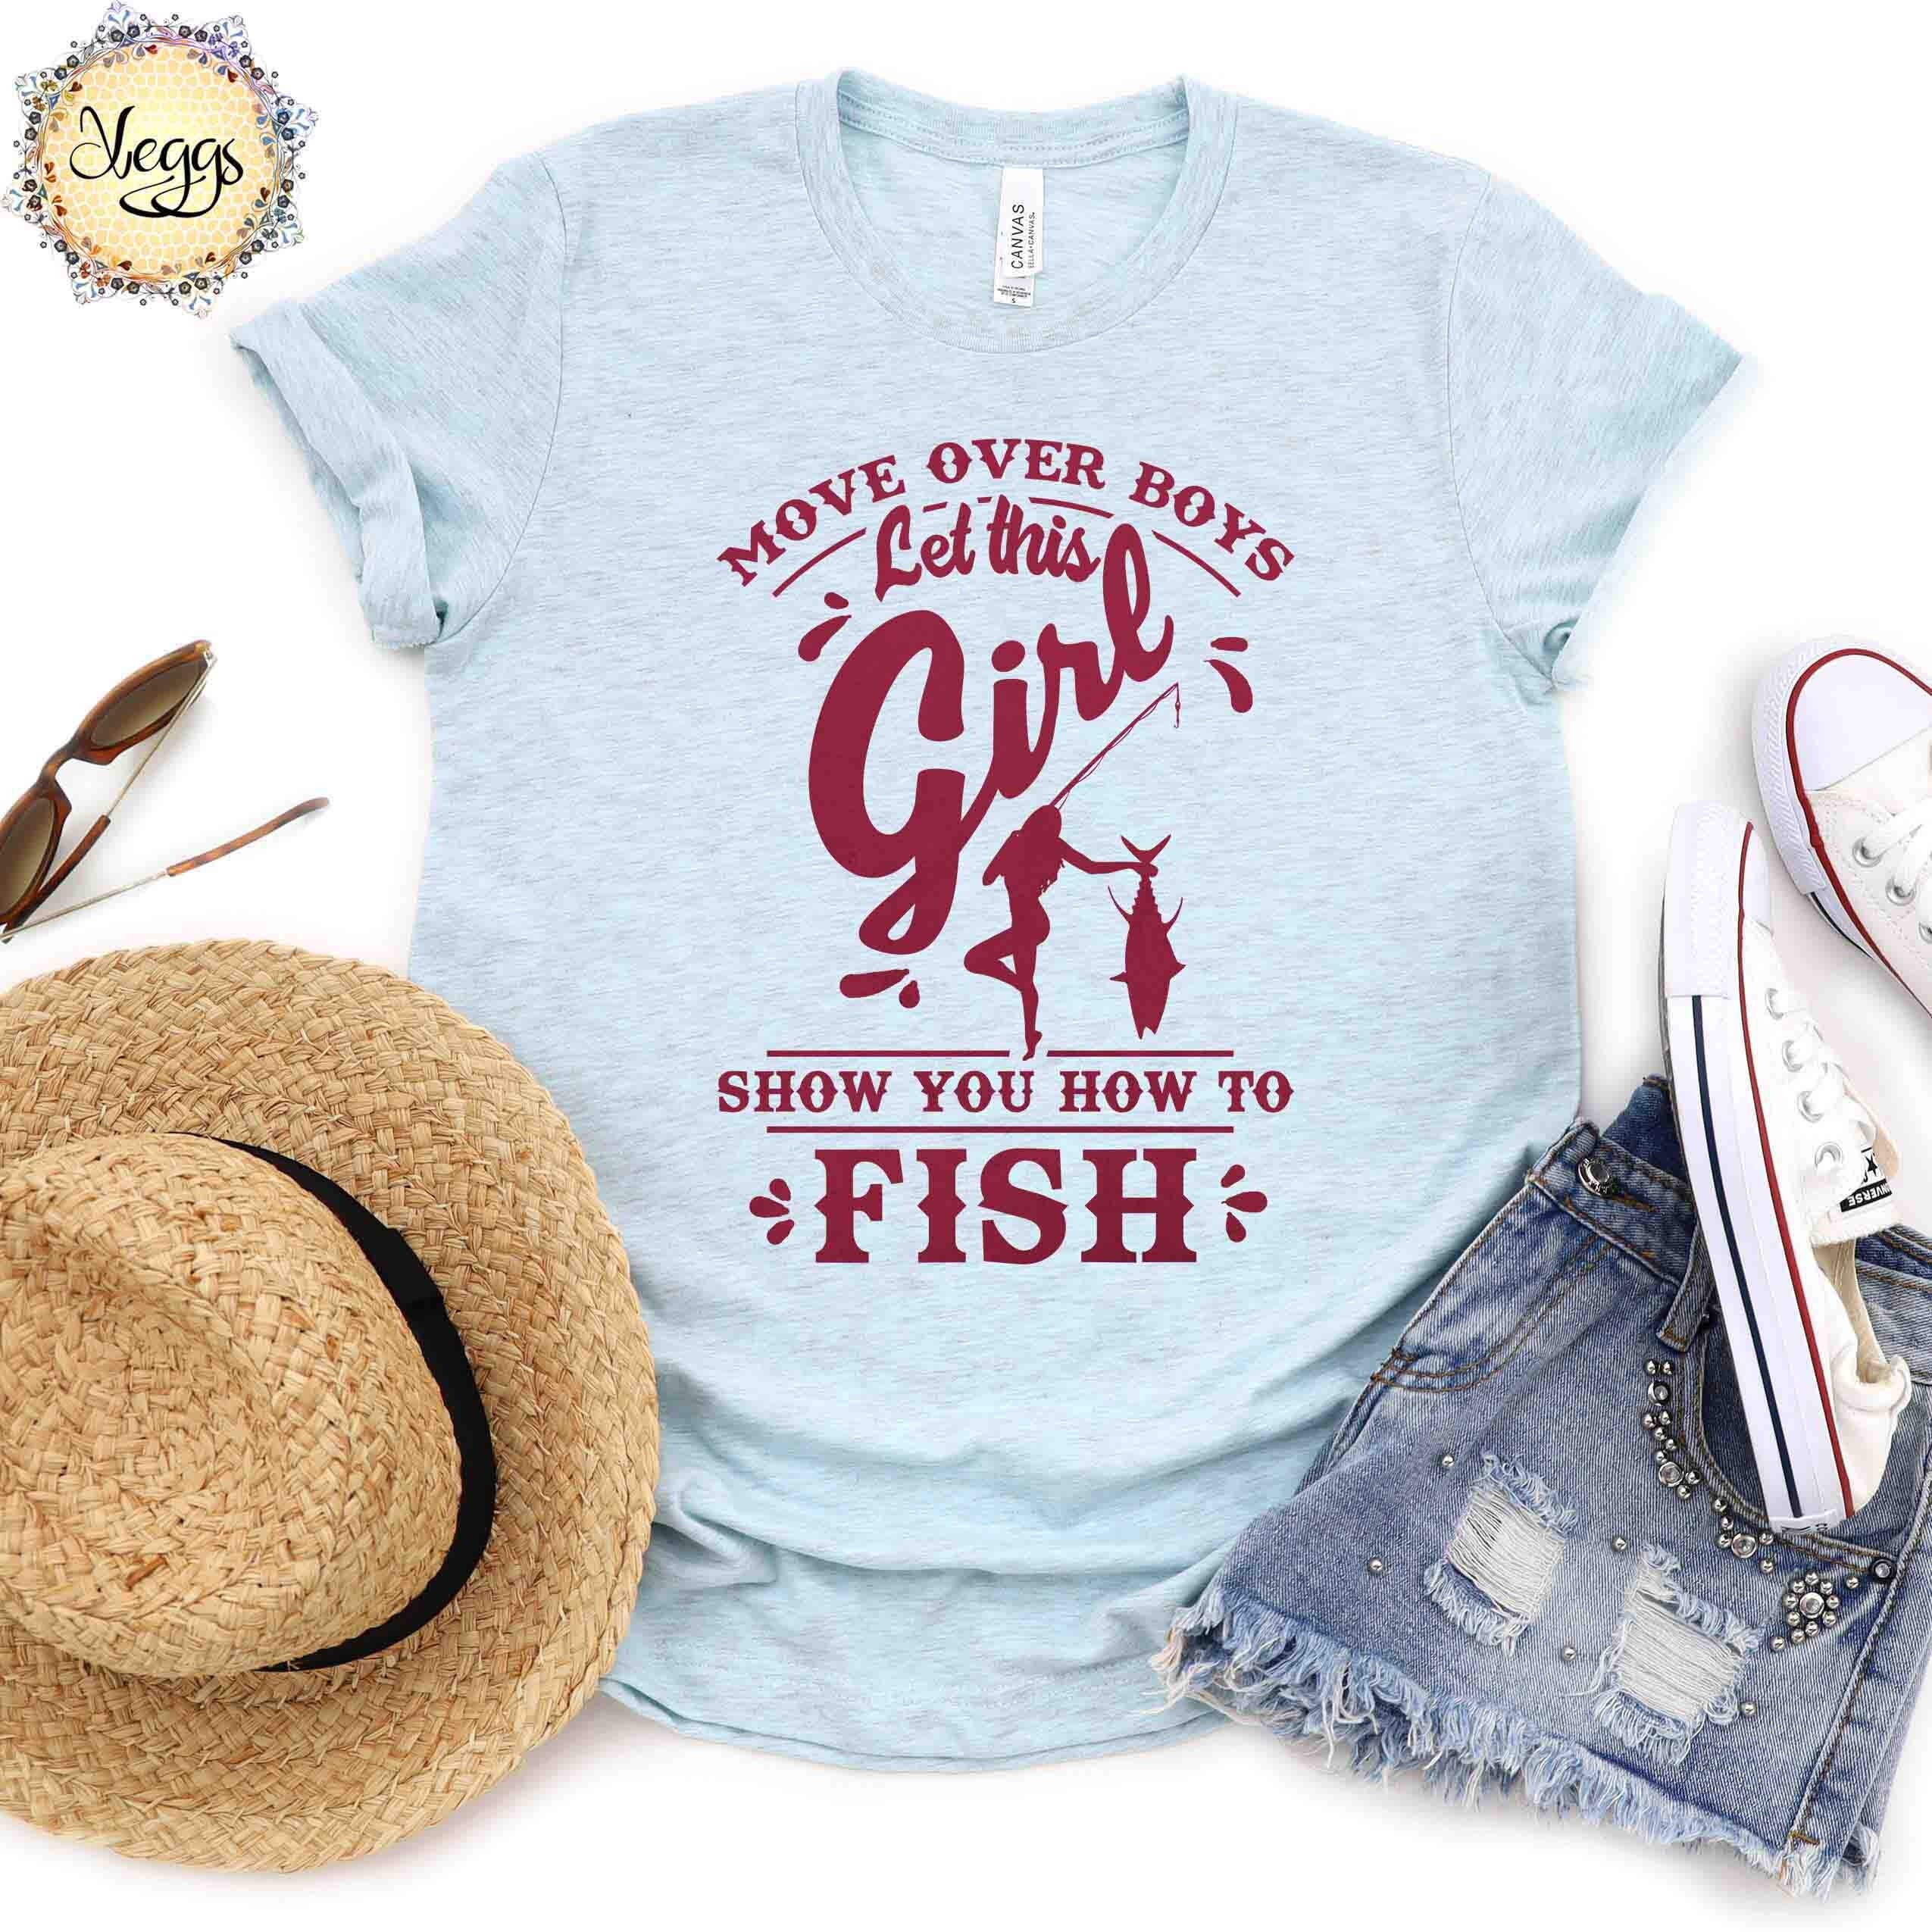 Move Over Boys, Fishing Shirt Womens, Let This Girl Show You How